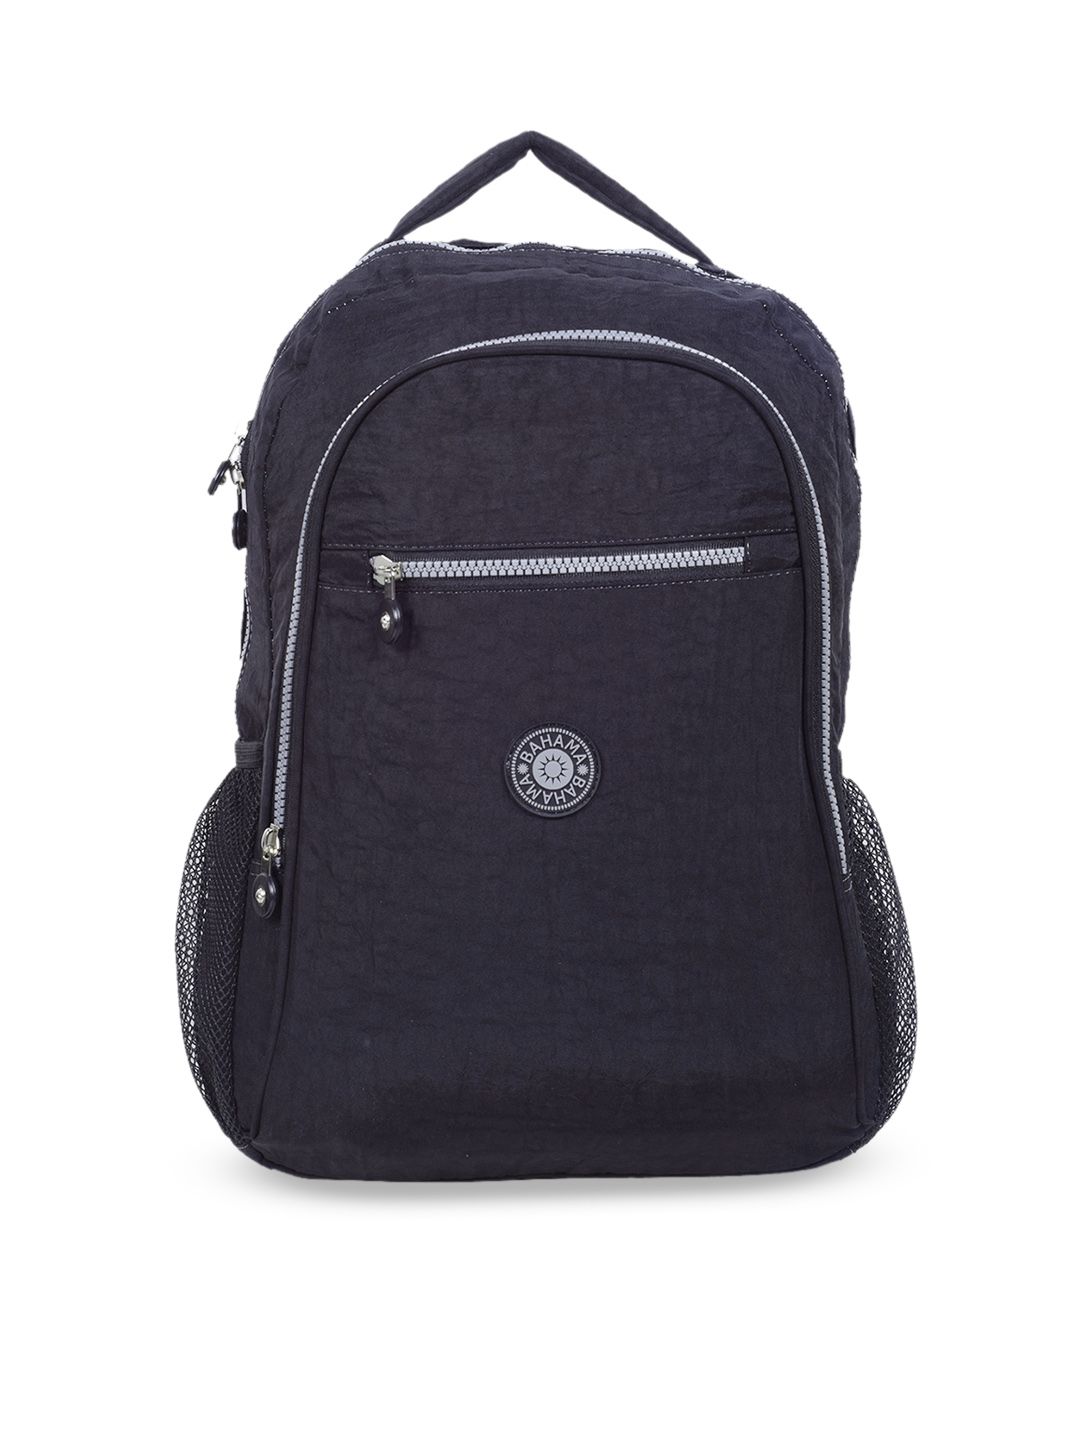 BAHAMA Crinkle Unisex Black Solid Backpack Price in India